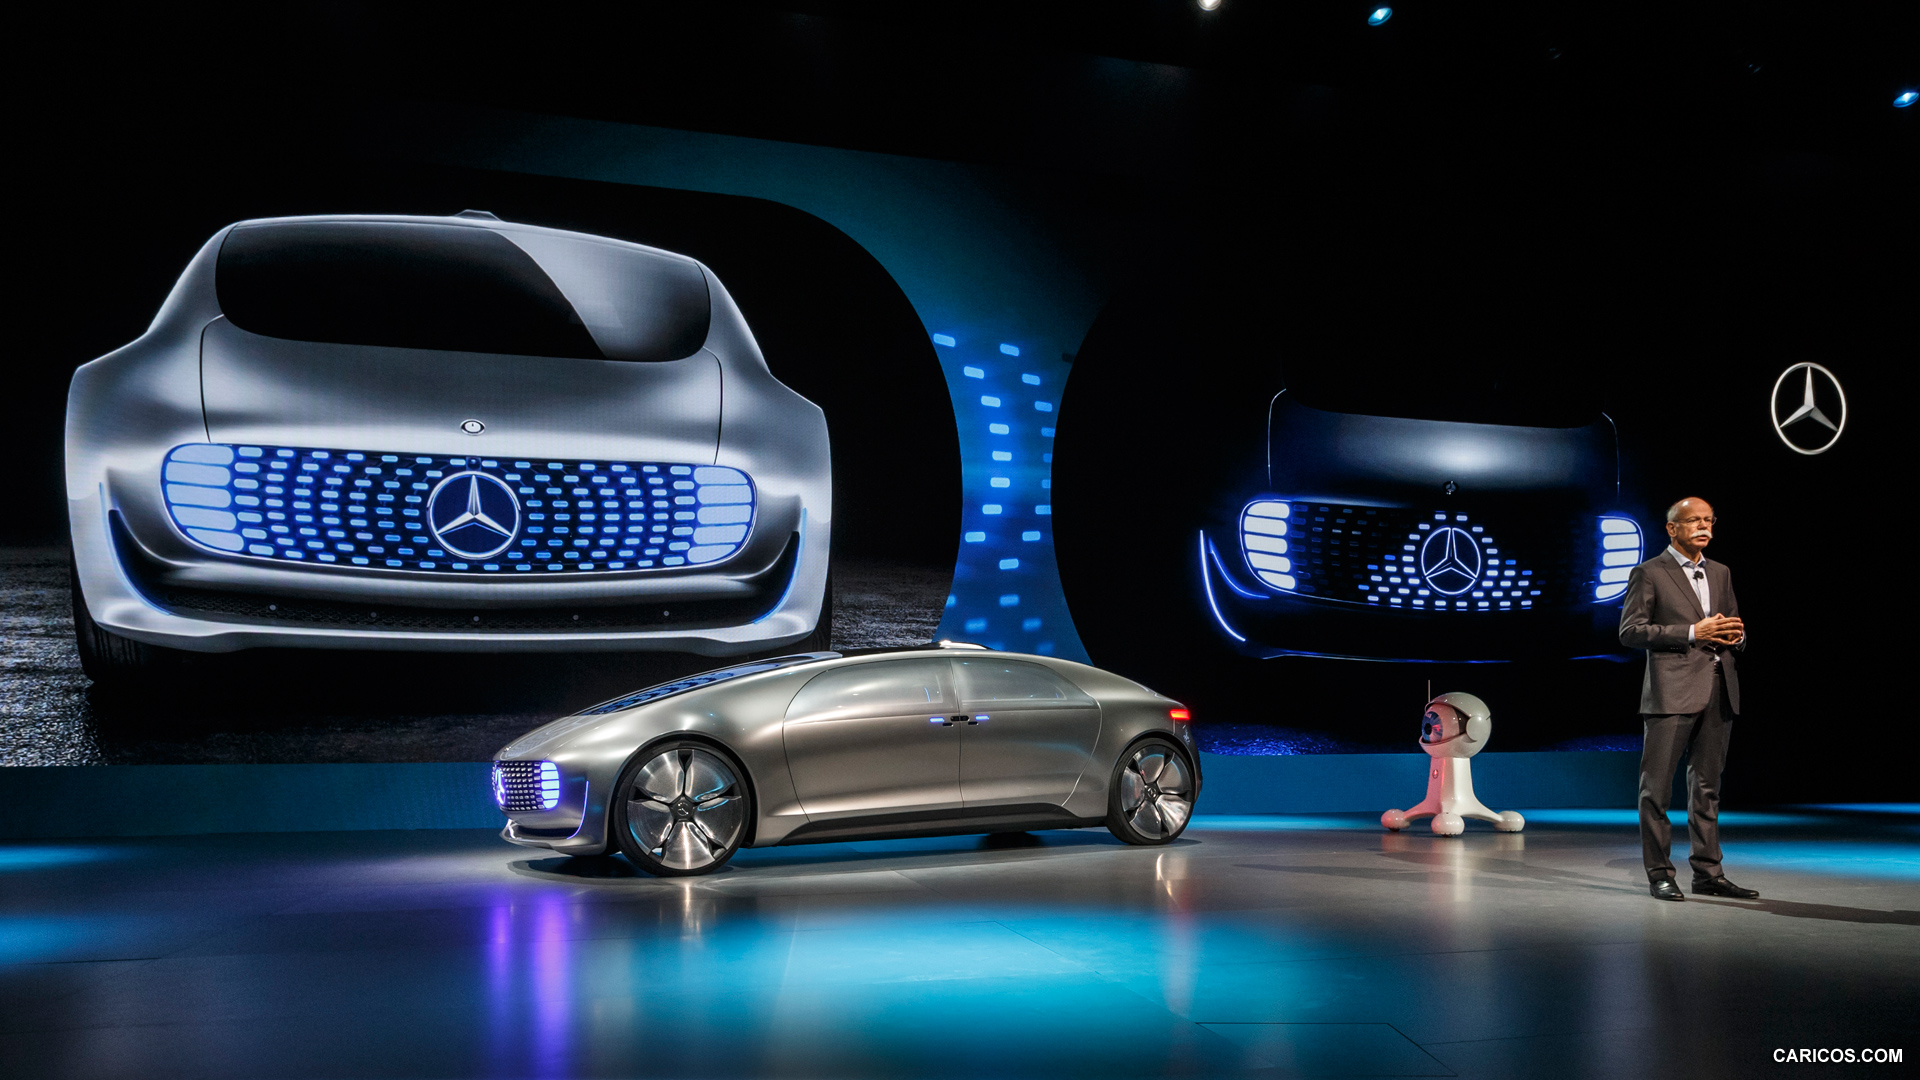 2015 Mercedes-Benz F 015 Luxury in Motion Concept at CES - Side, #84 of 92